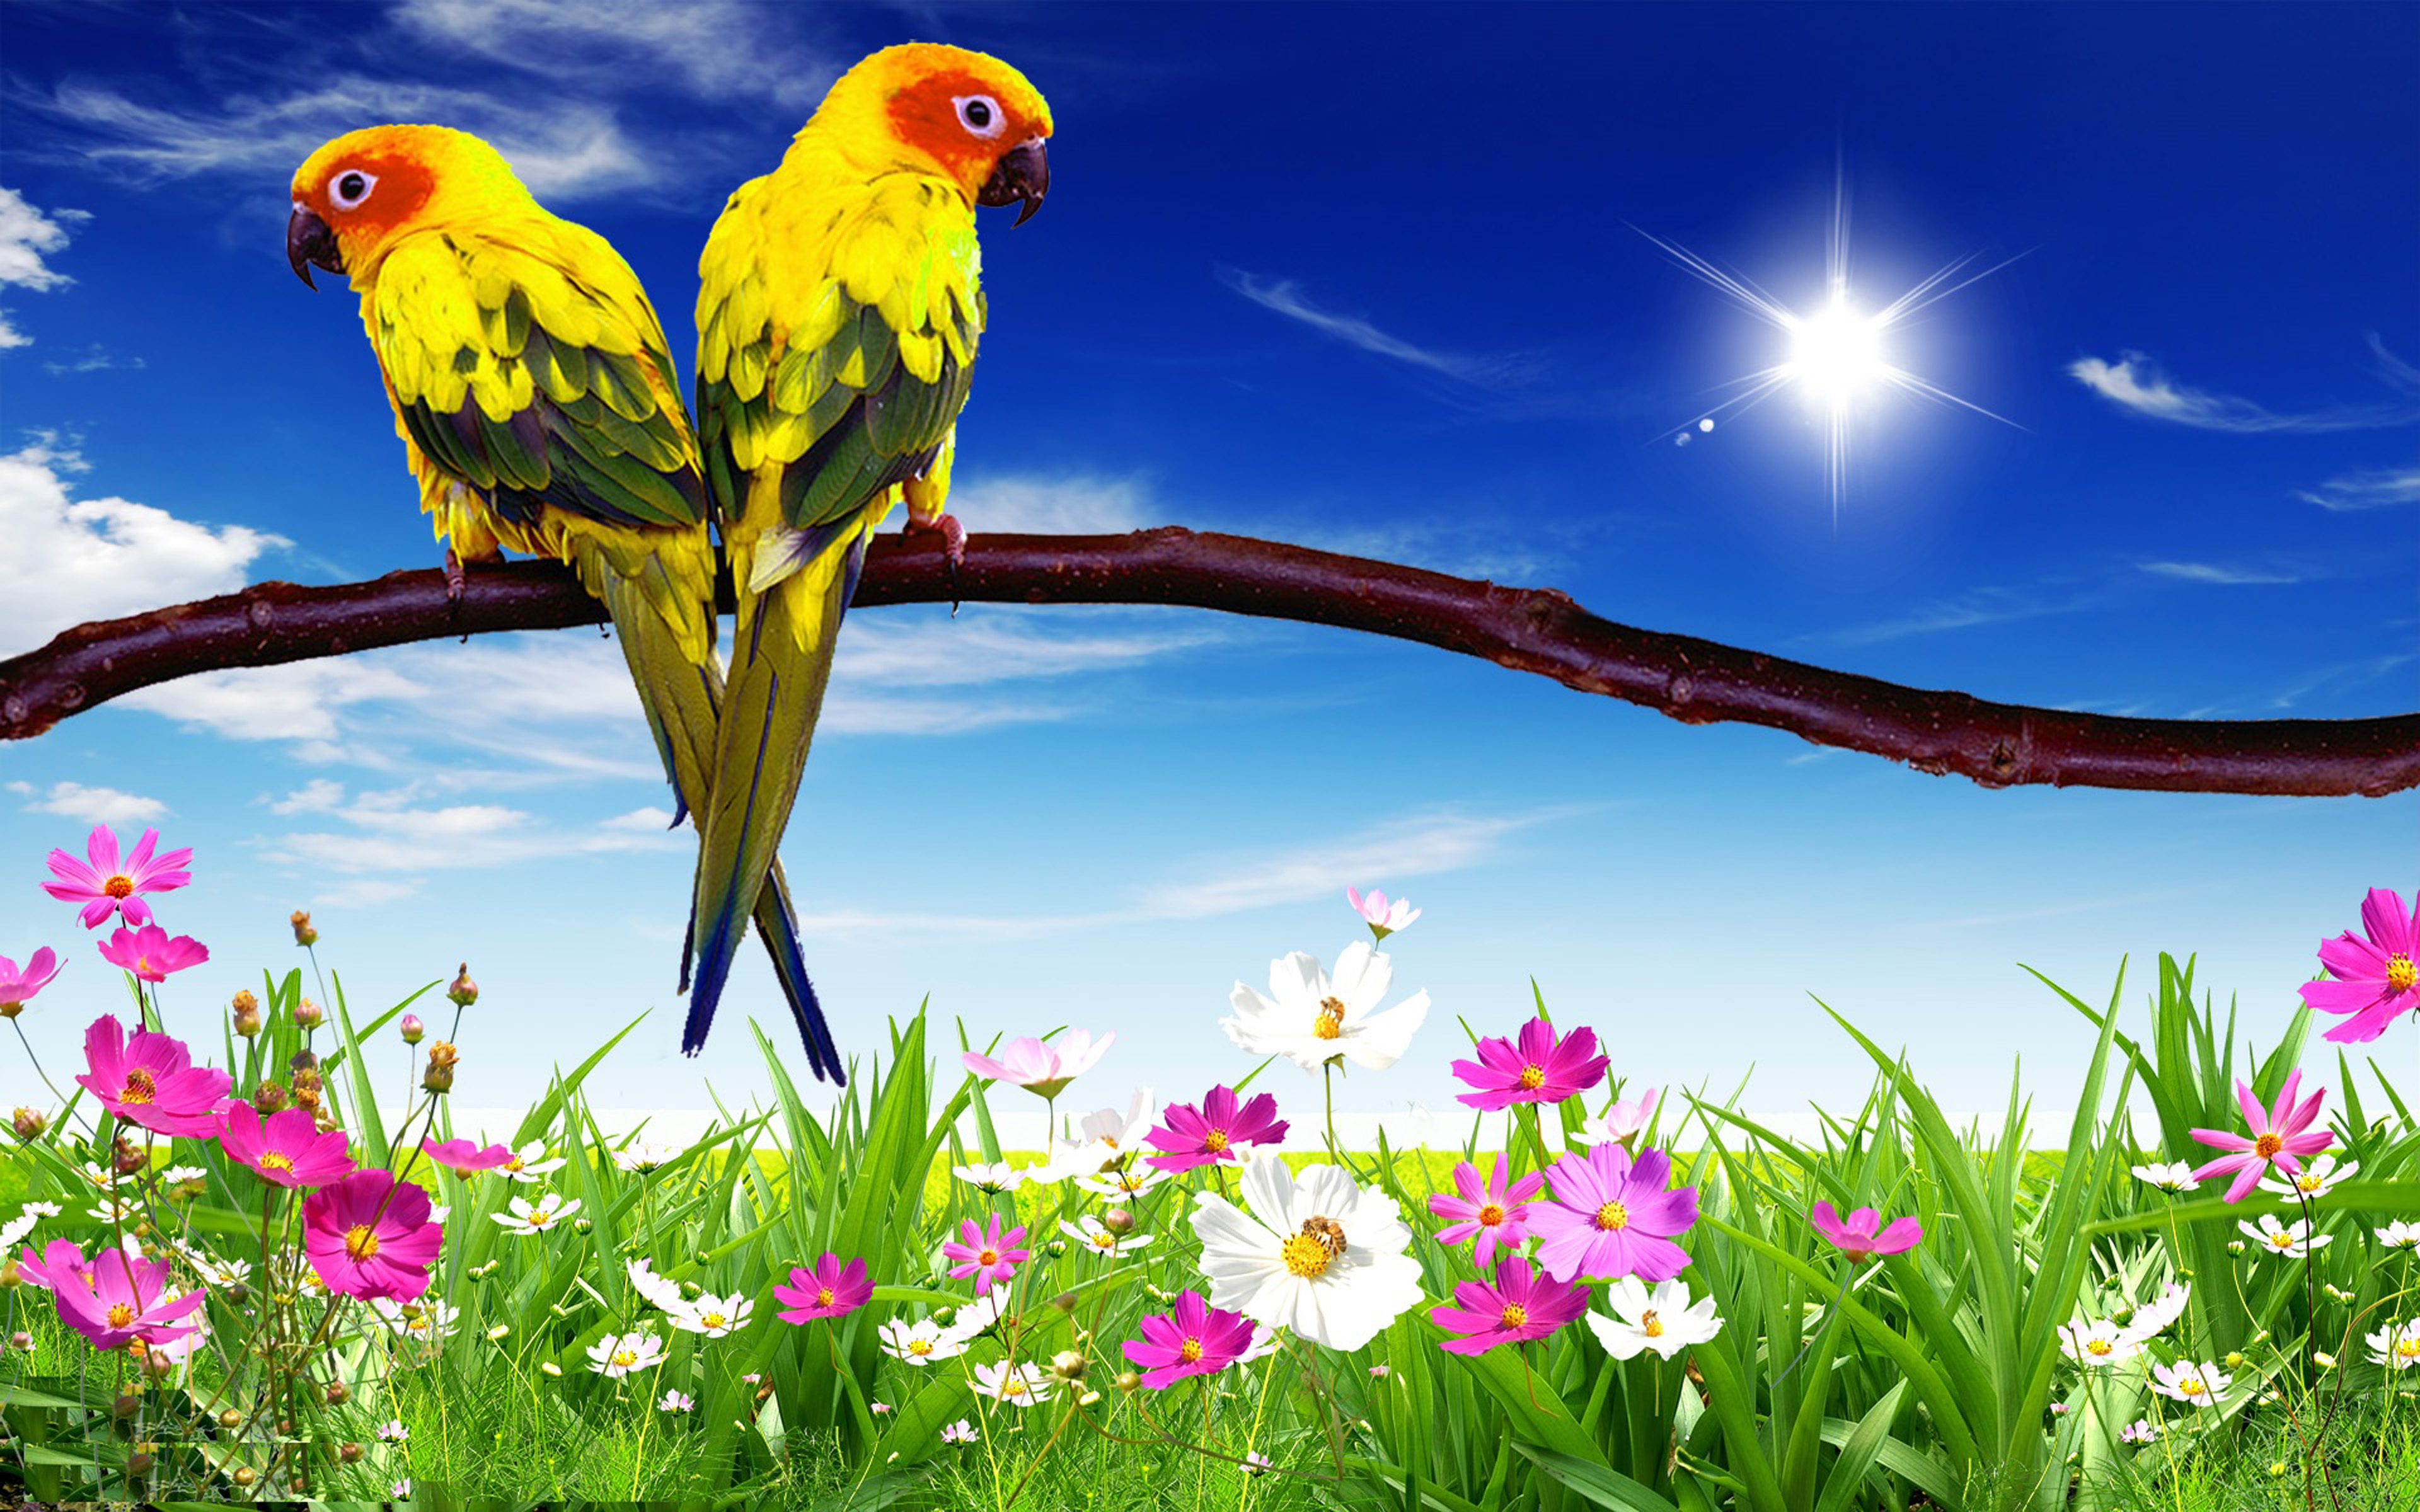 Parrots Pair Hd Desktop Background For Mobile Phone And Laptop : Wallpapers13.com